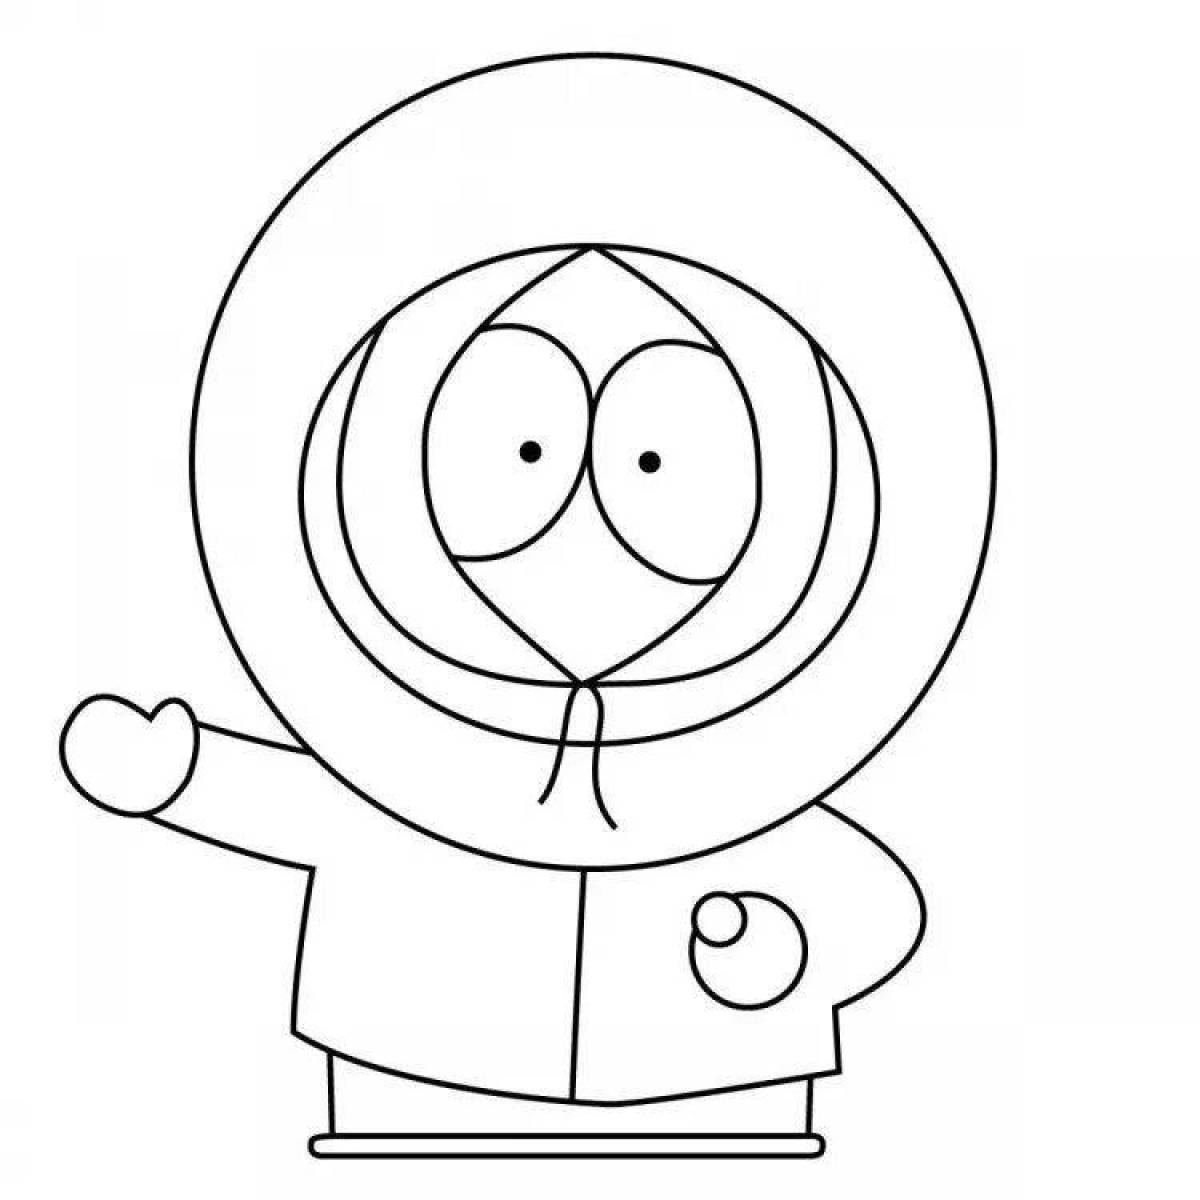 Kenny coloring pages with crazy color